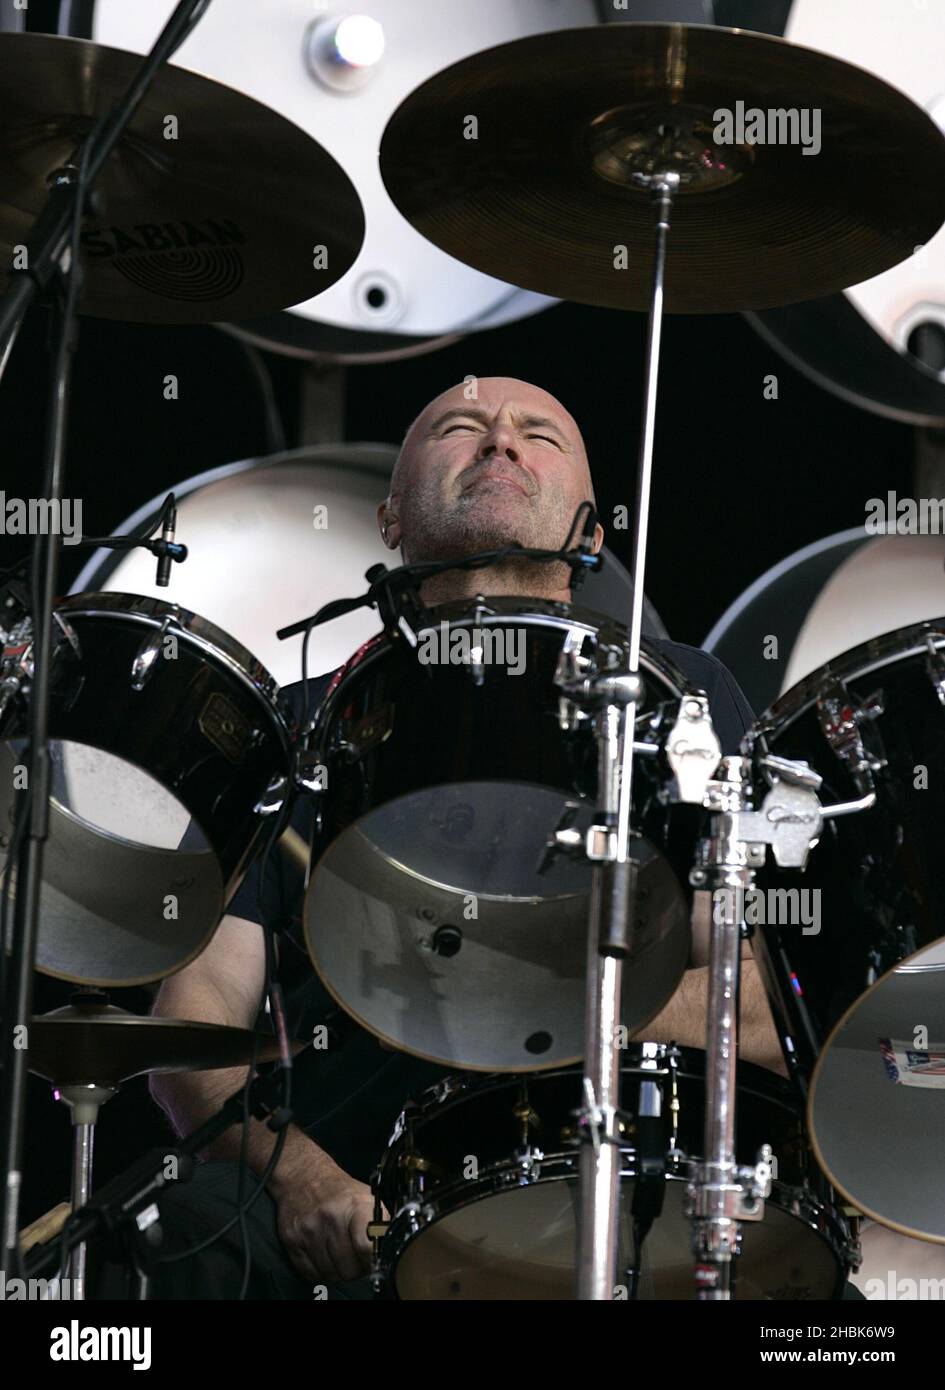 Phil Collins - Another Day in Paradise (Seriously Live in Berlin